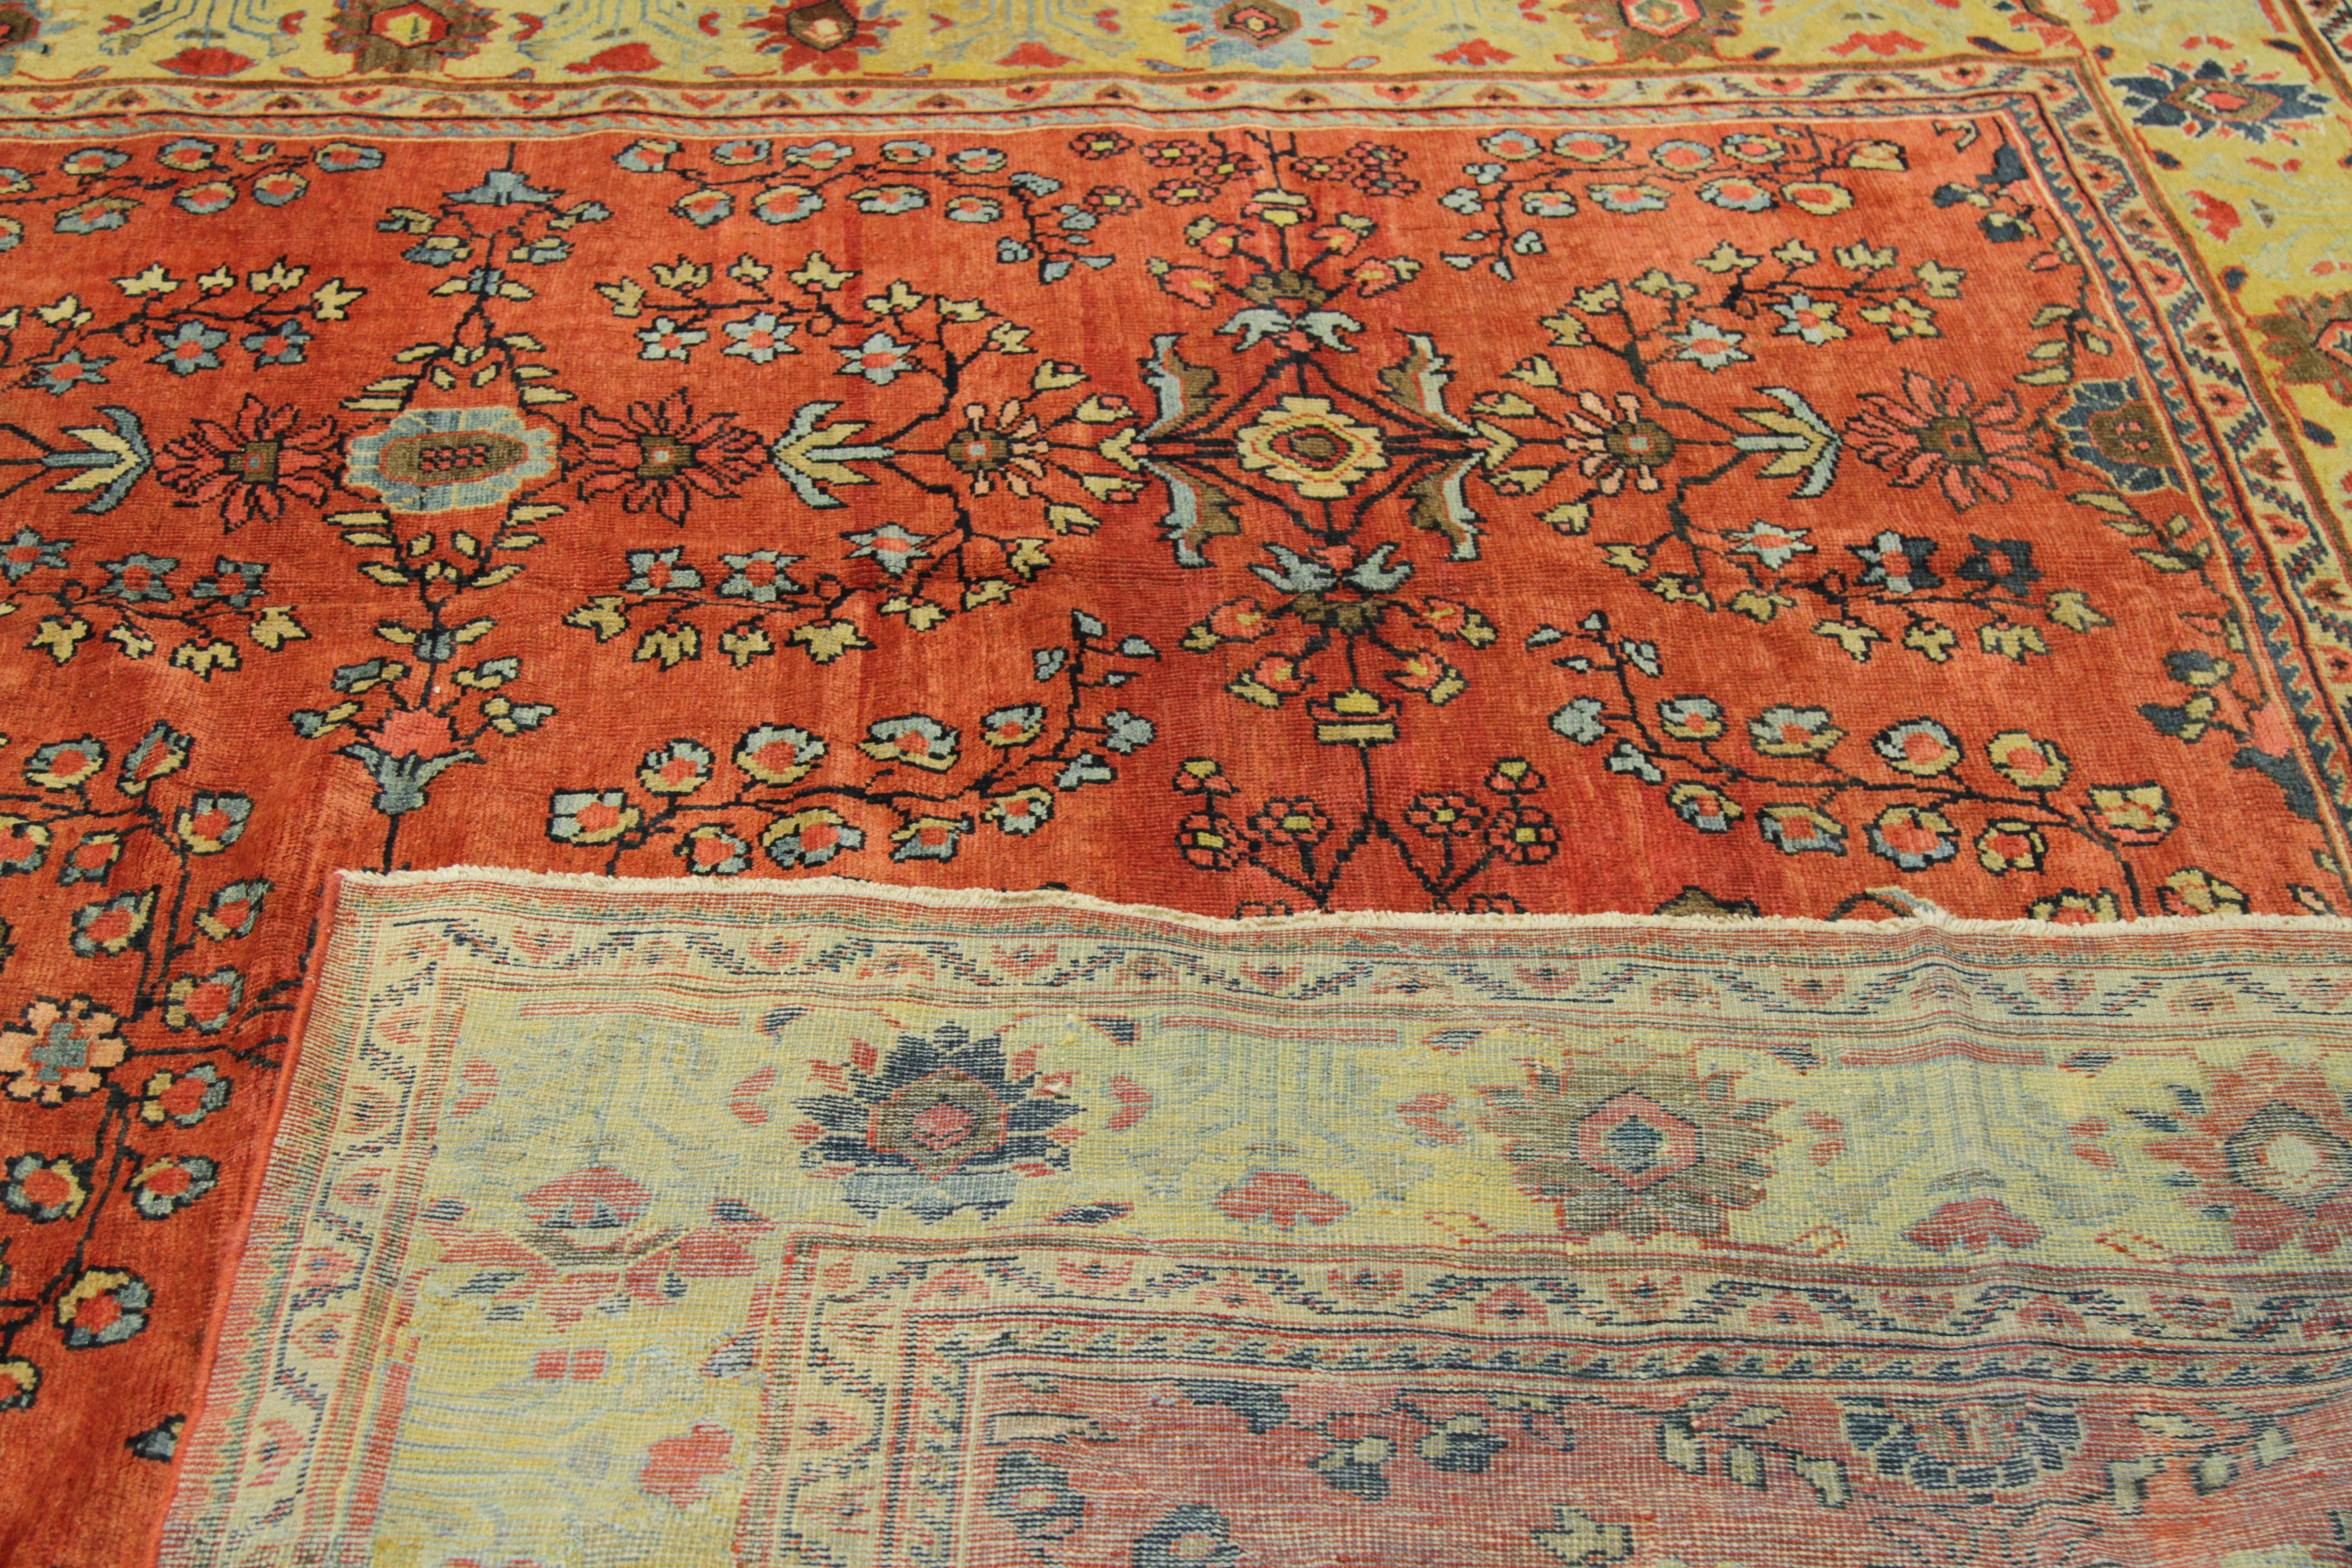 Hand-Knotted 1920s Antique Mahal Persian Rug with Red and Yellow Floral Patterns For Sale